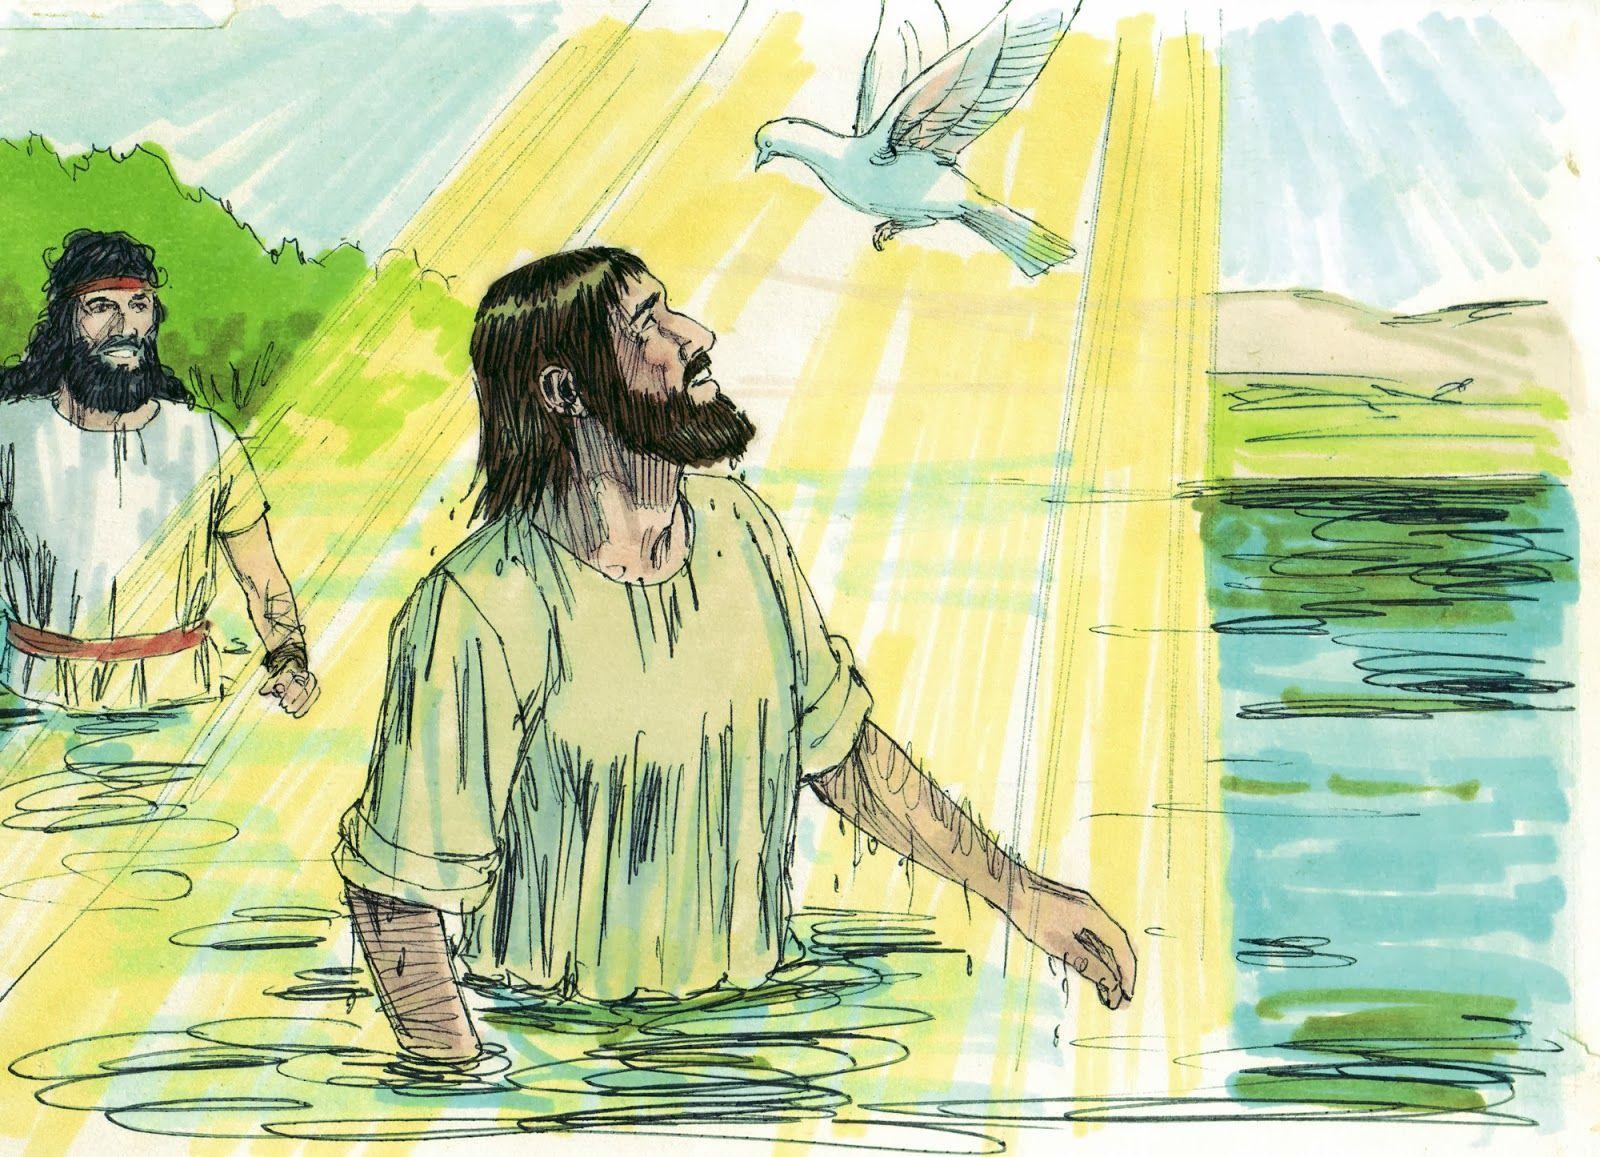 HD wallpaper coloring page of jesus going to heaven ncv.earecom.press